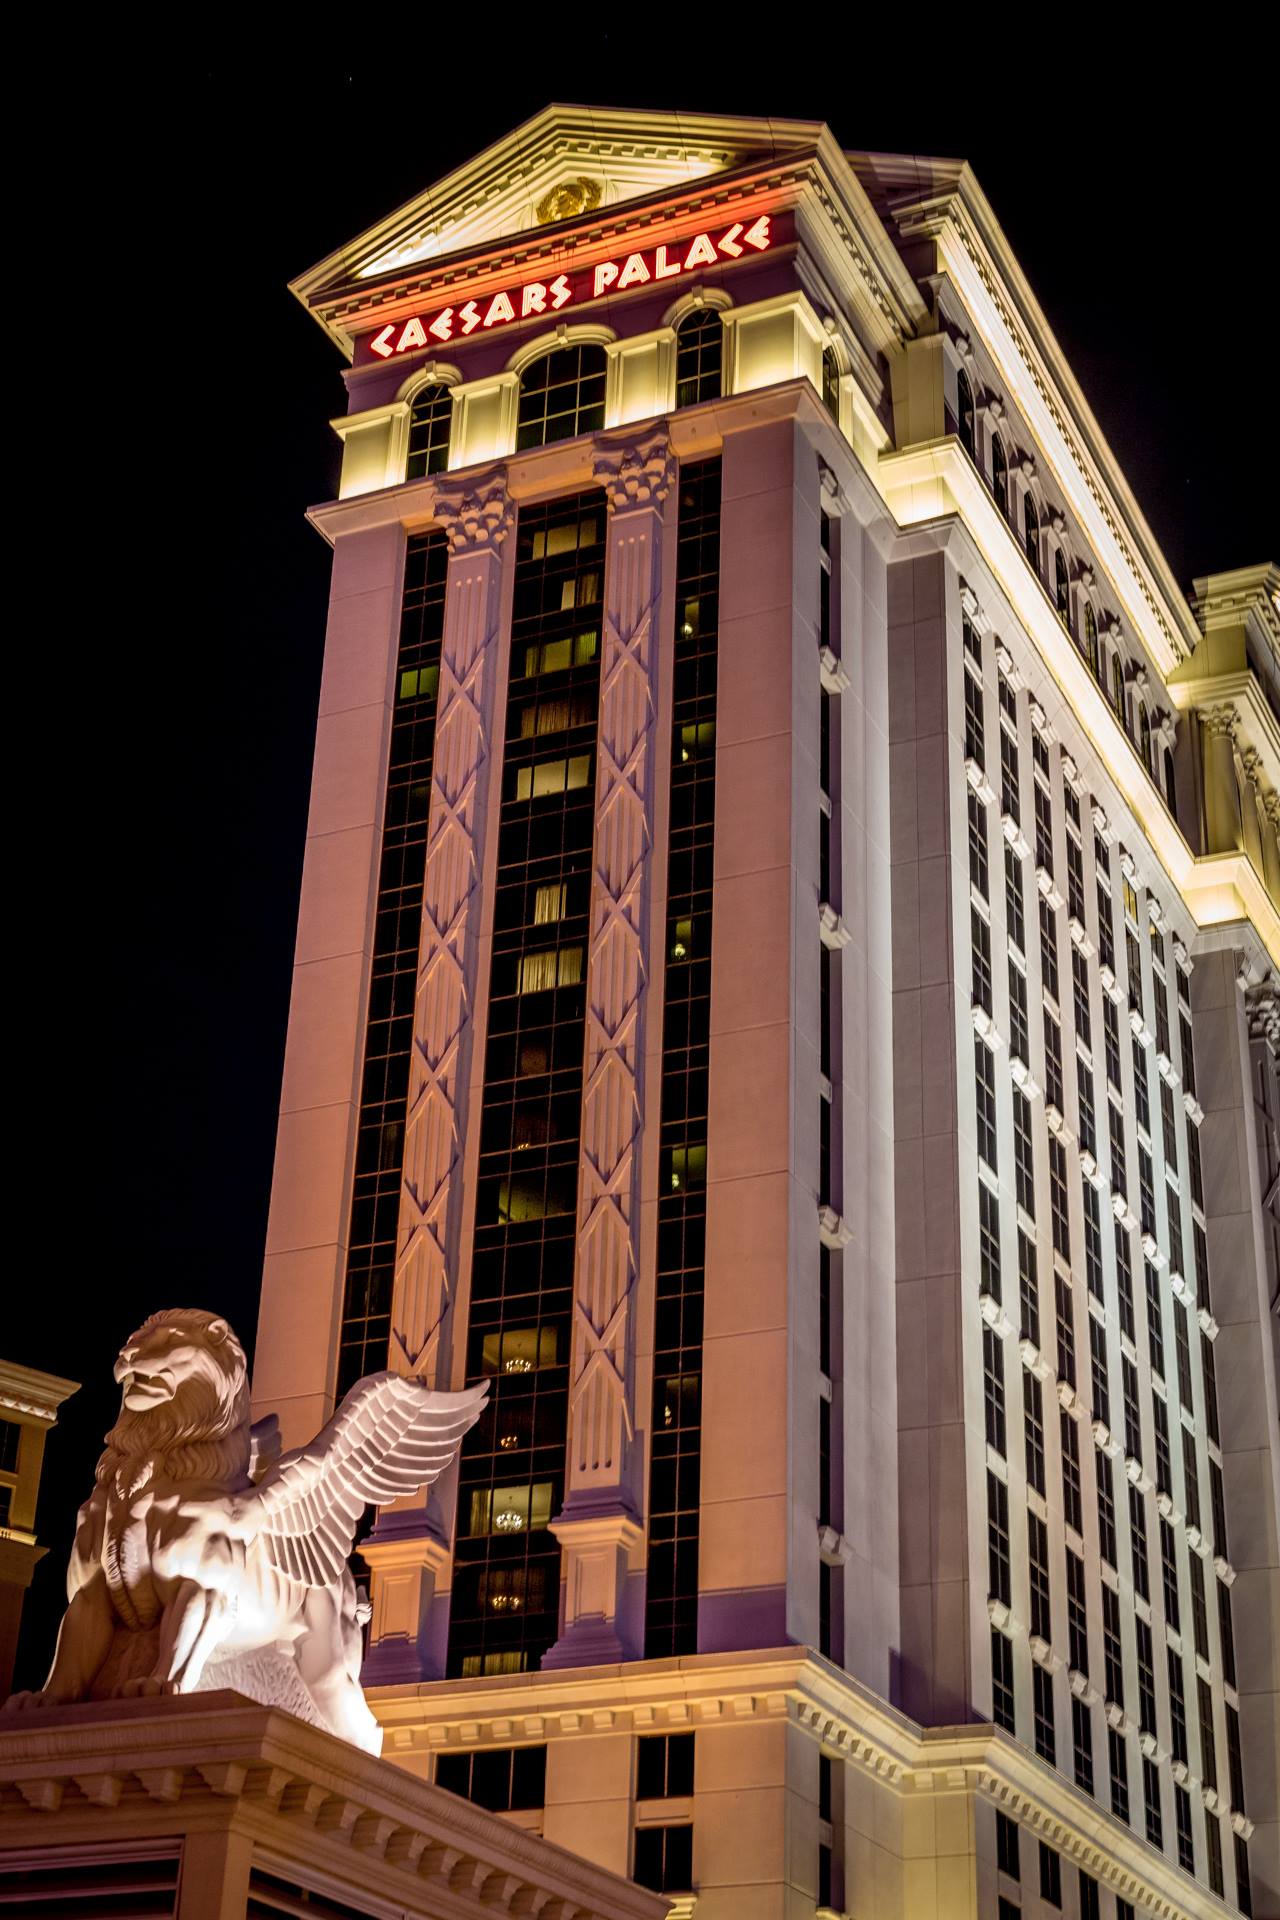 Ceasar's Palace - Ceasar's Palace in Las Vegas, Nevada. by Scott Smith Photos